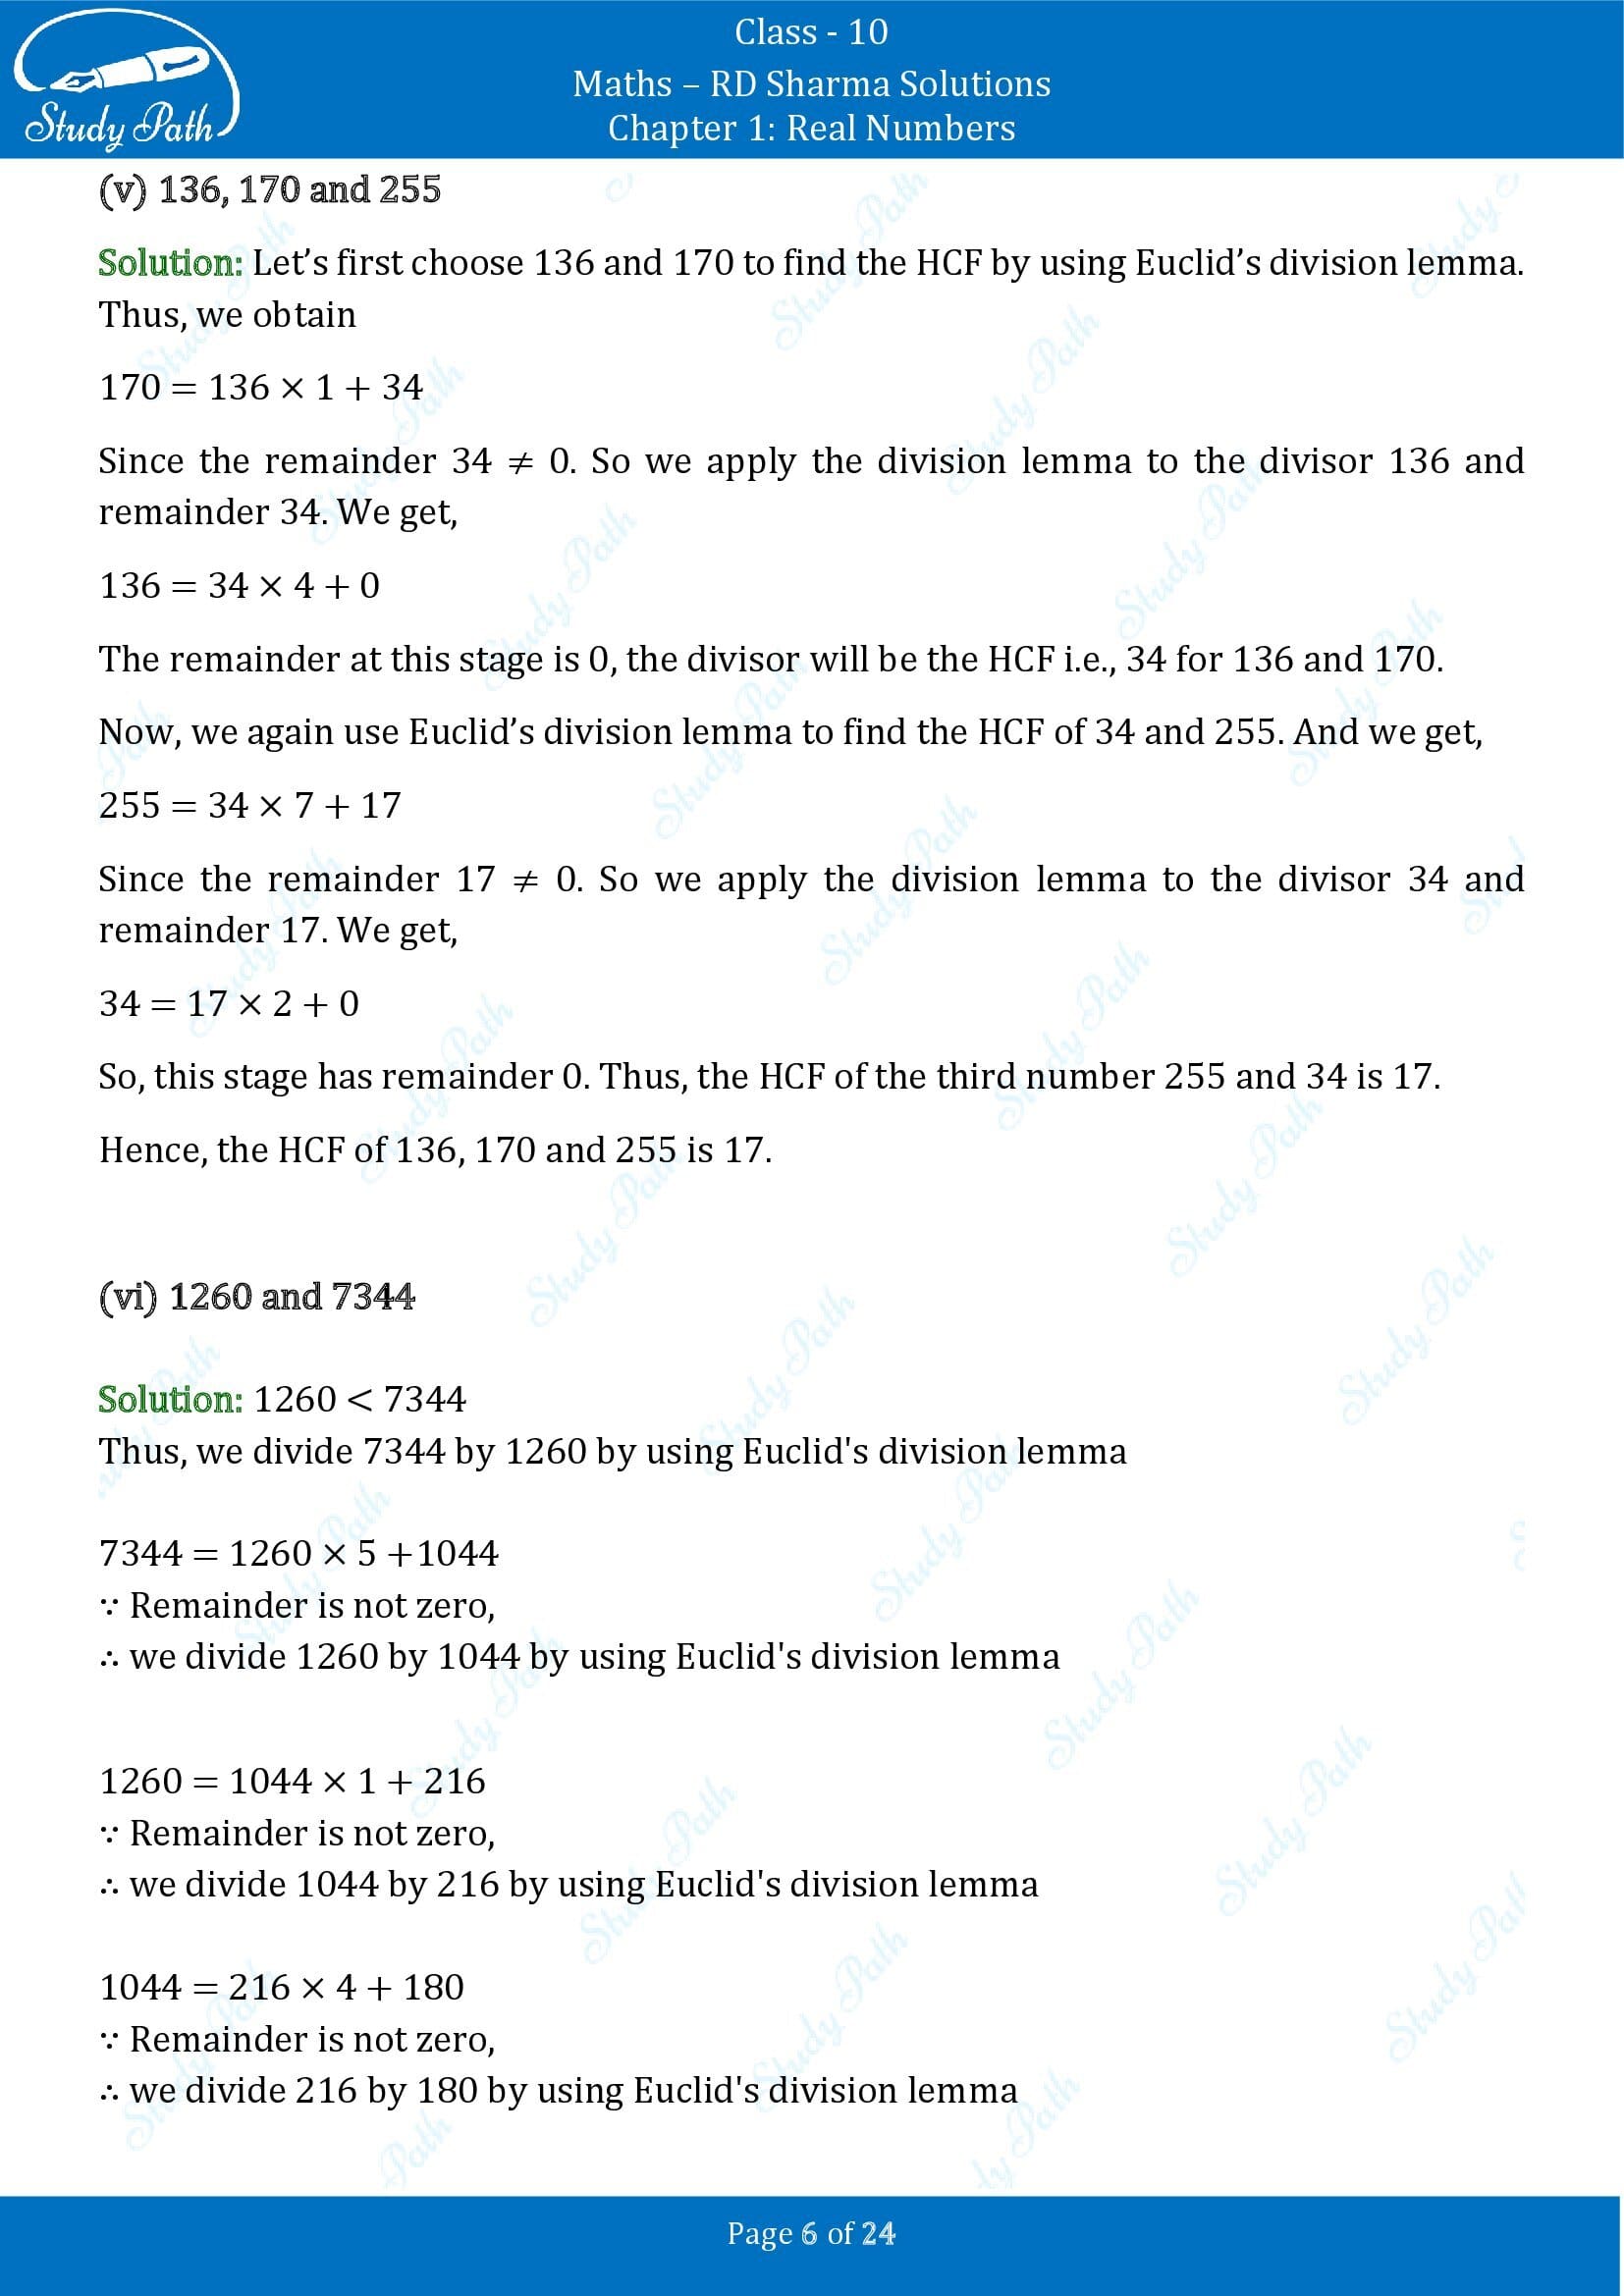 RD Sharma Solutions Class 10 Chapter 1 Real Numbers Exercise 1.2 00006